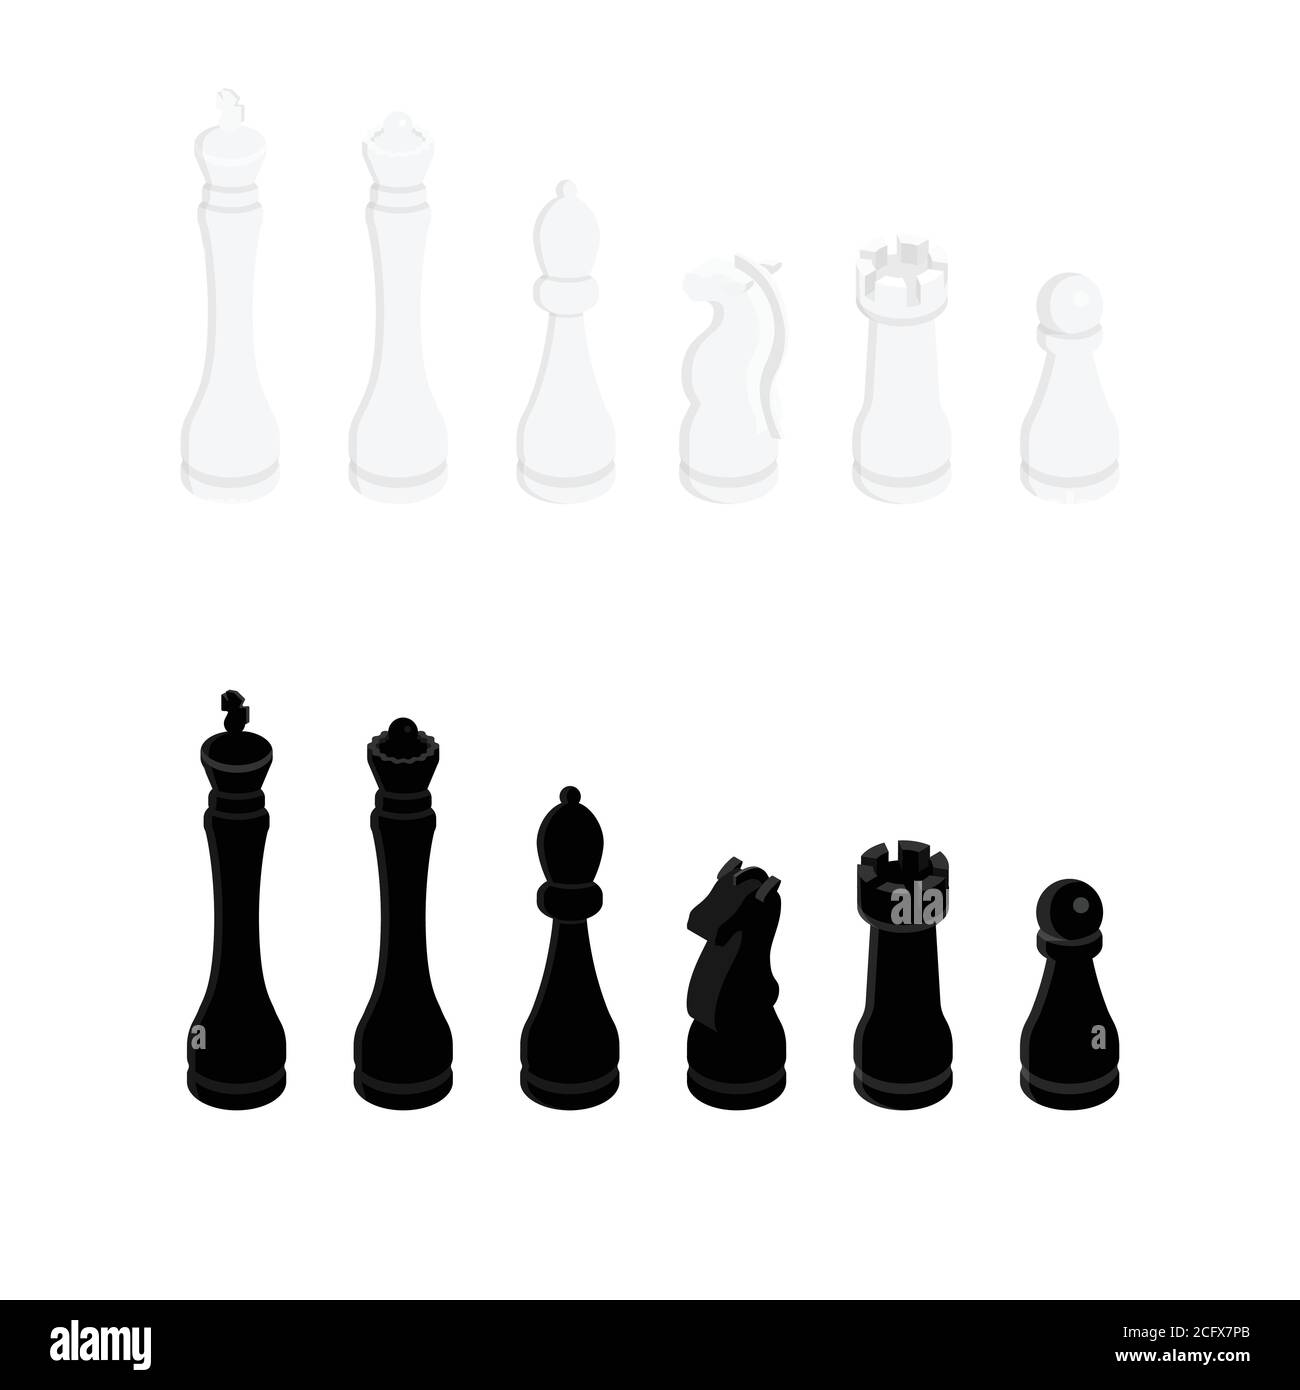 Two chess pieces - pawns made from lacquered wood Vector Image